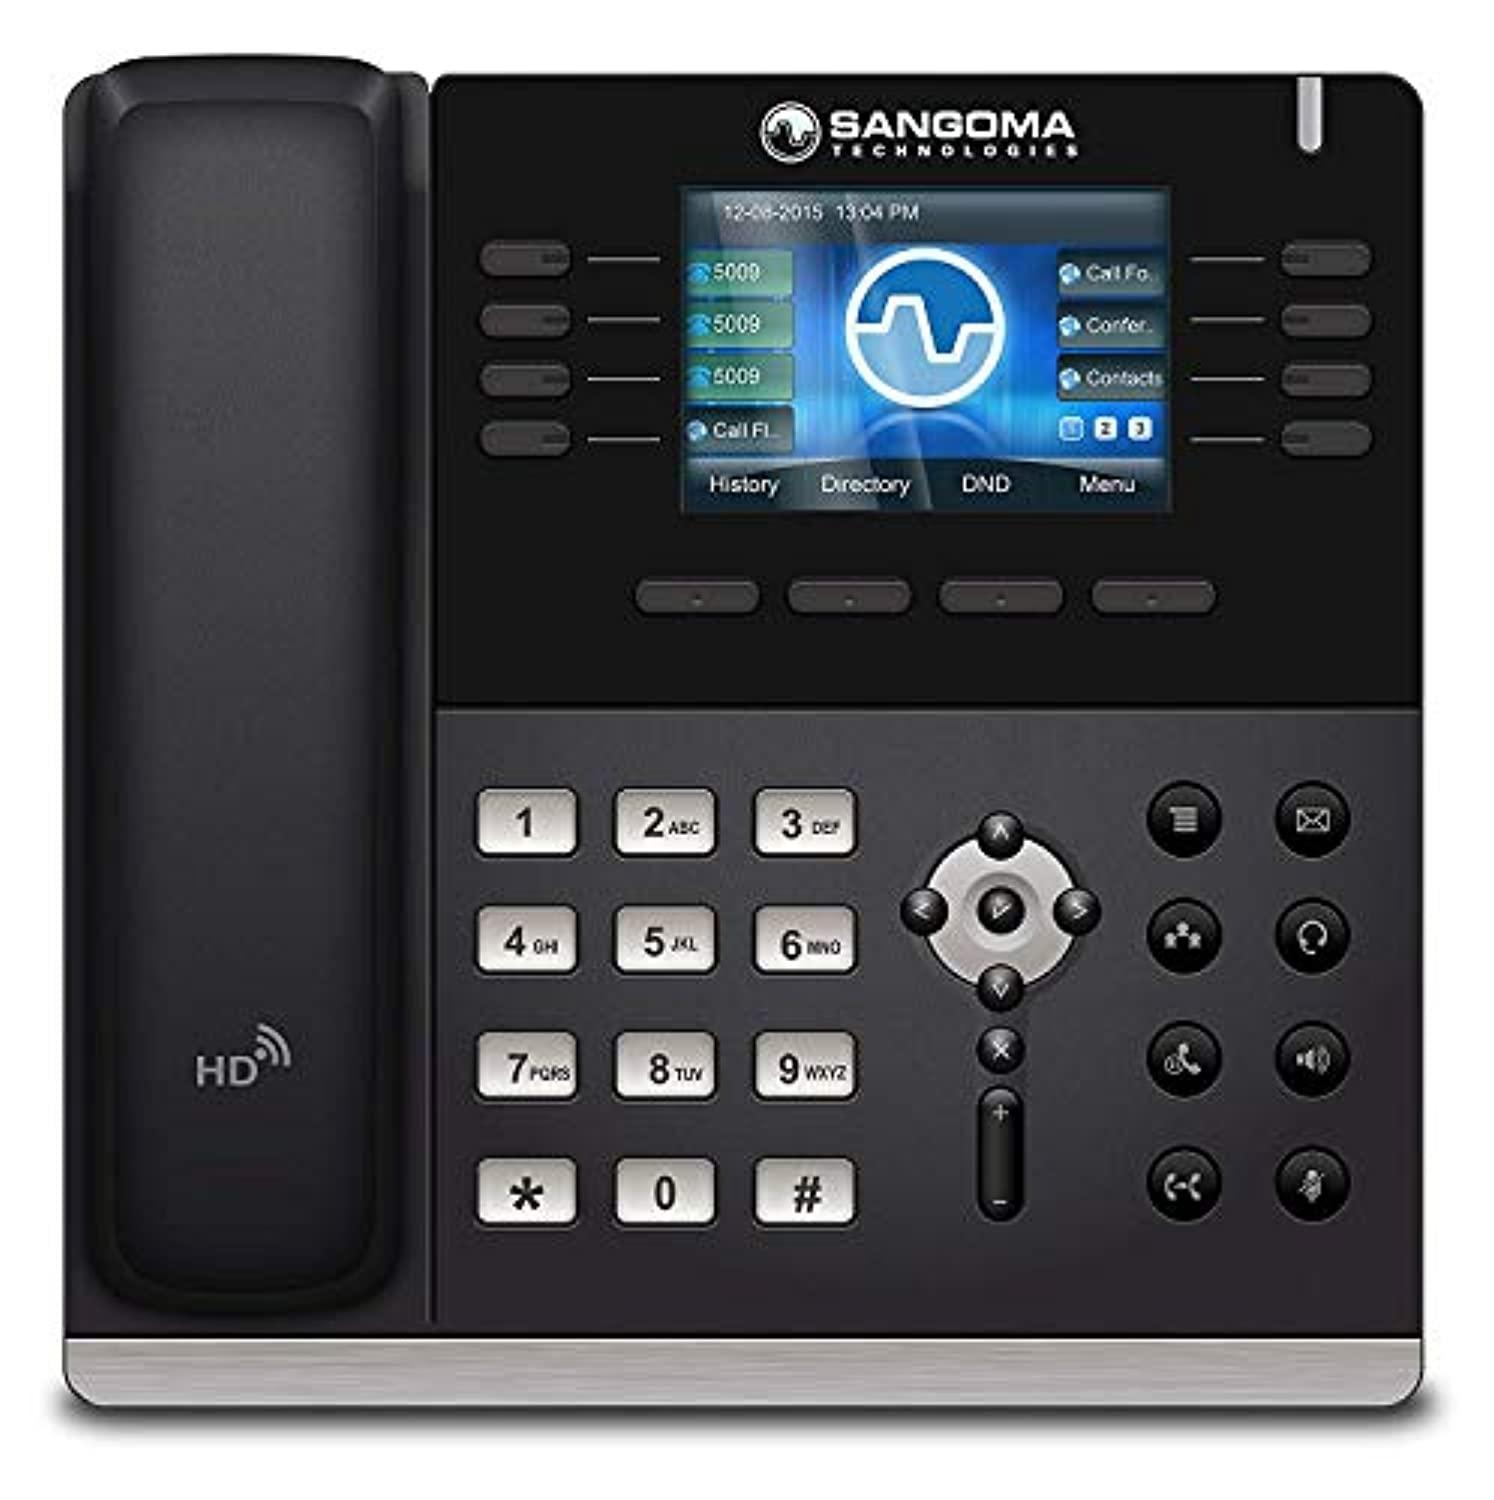 SANGOMA US INC.. sangoma s505 voip phone with poe (or ac adapter sold separately), model: phon-s505